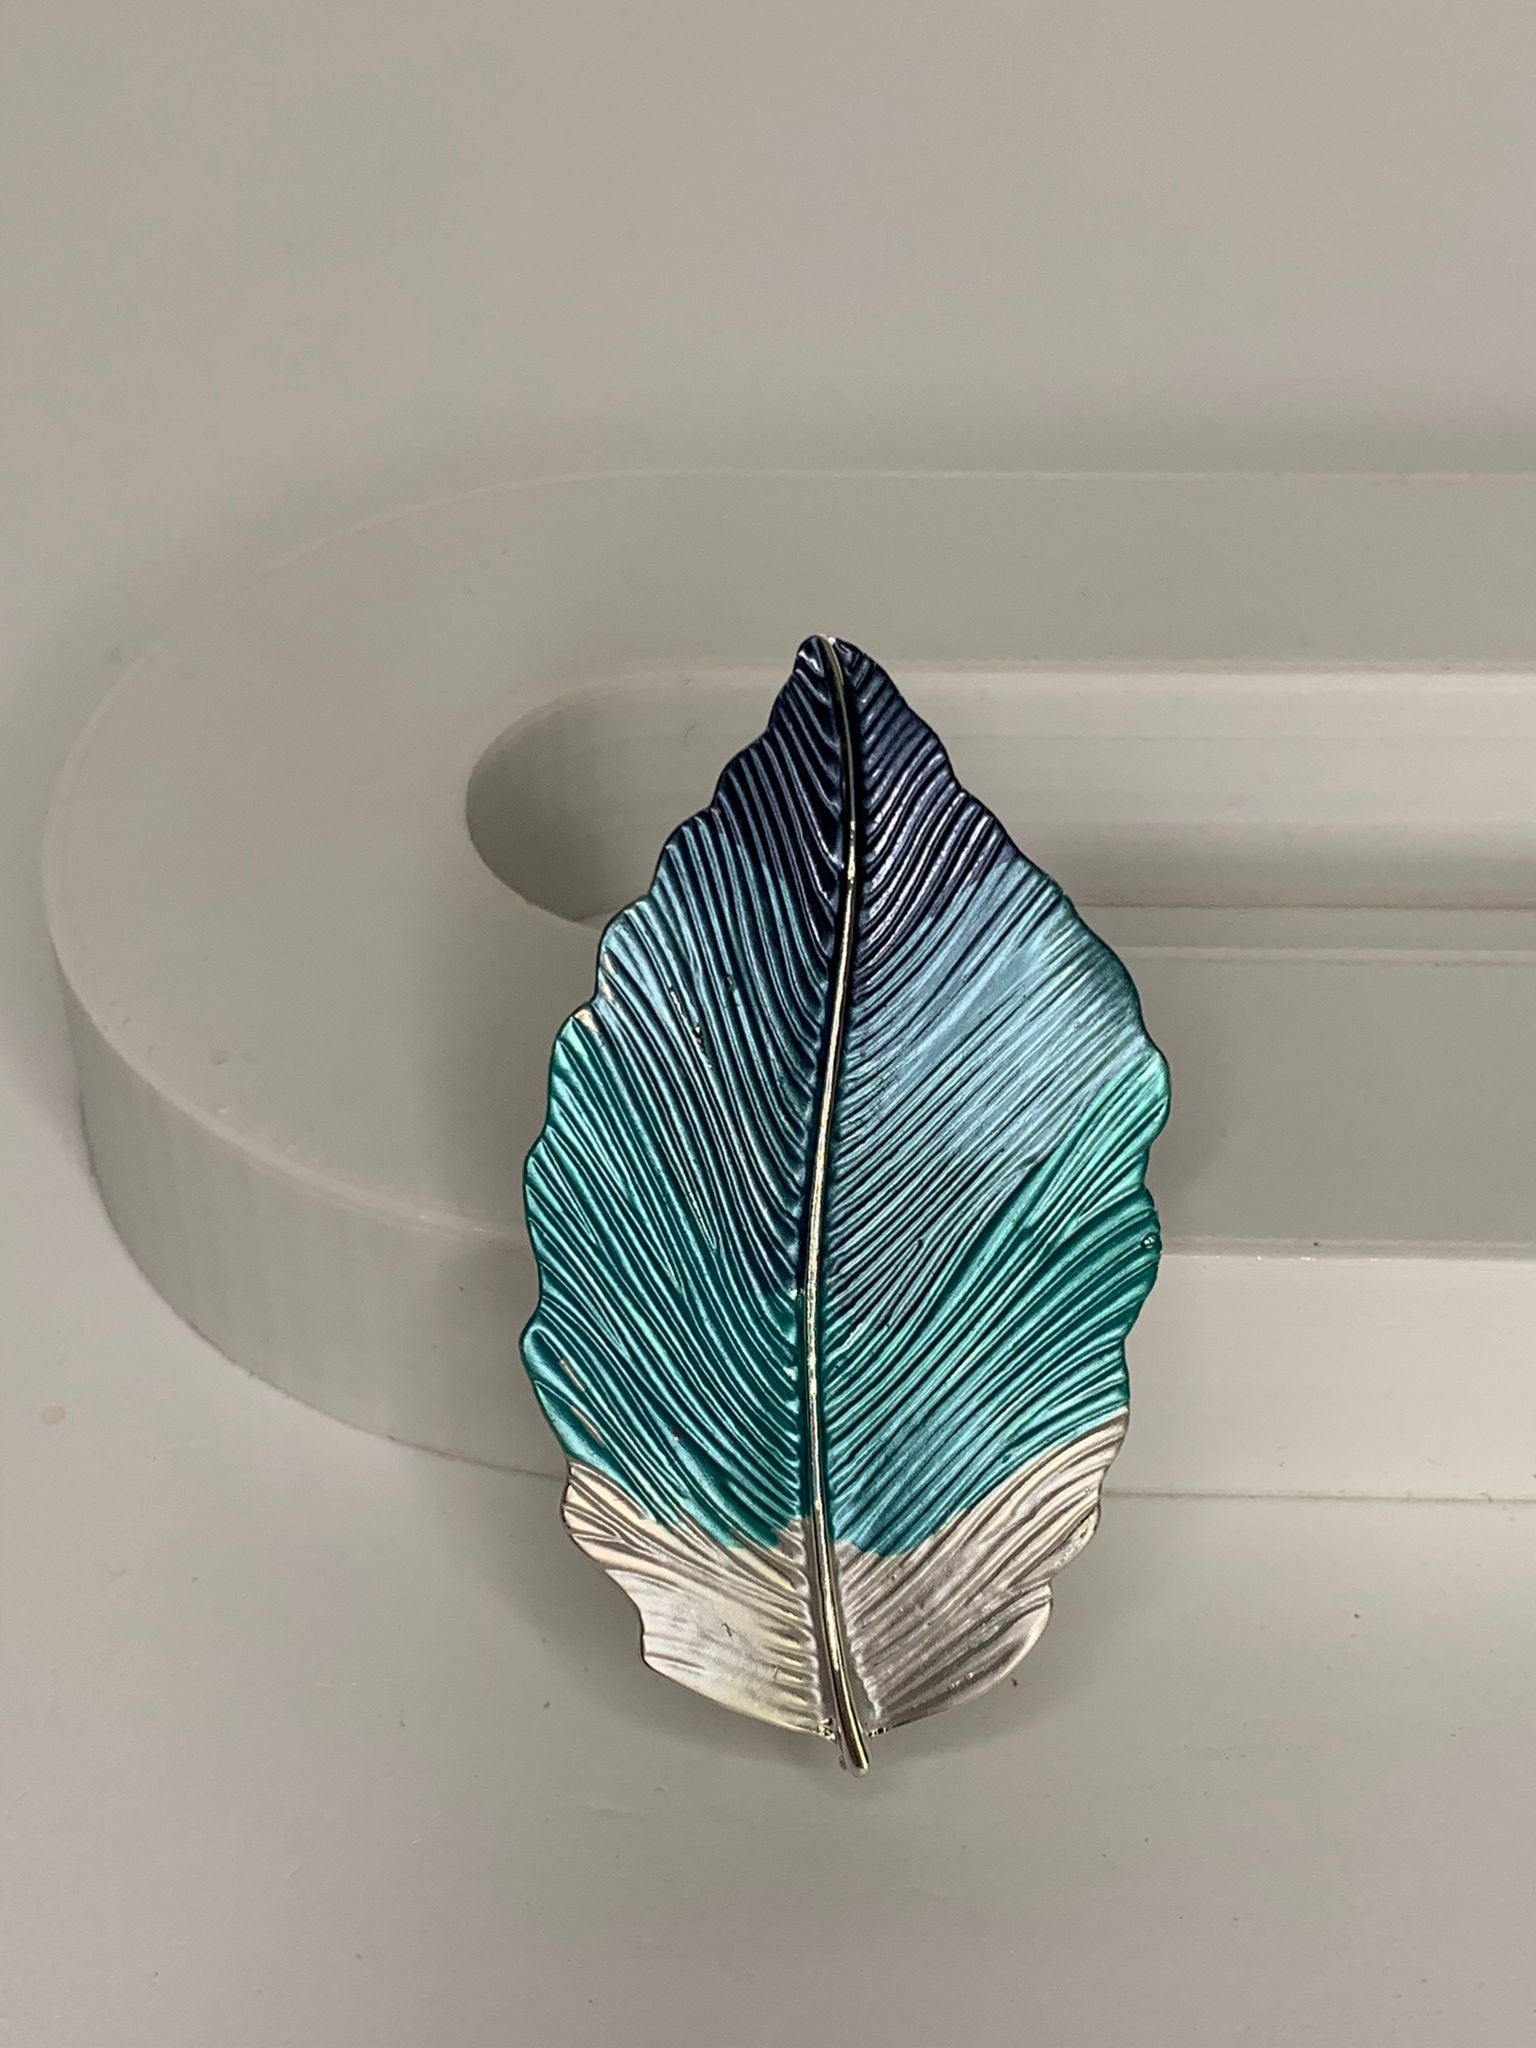 Magnetic brooch & scarf clip  - 'lined leaf' design in shades of navy, aqua blue and turquoise